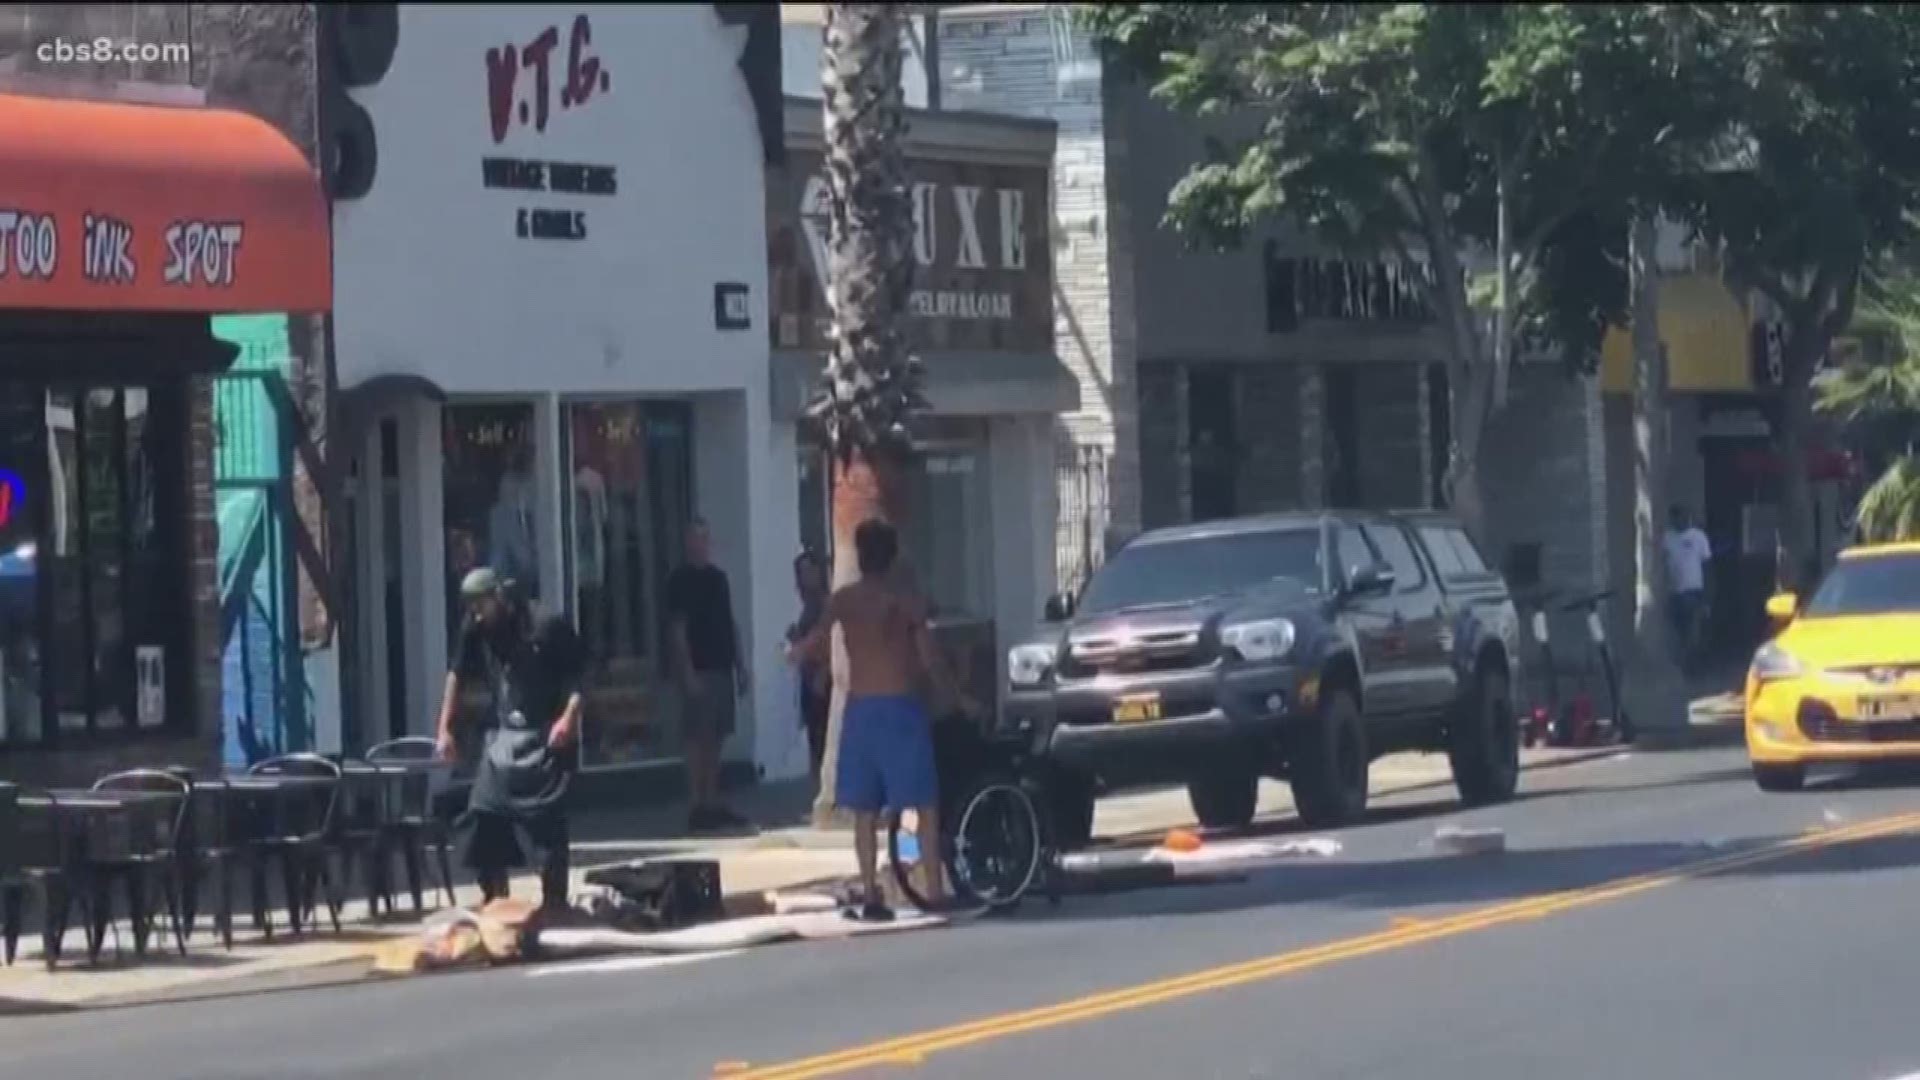 A Pacific Beach sandwich shop employee was caught on video confronting a homeless man, but he said the video does not tell the whole story.